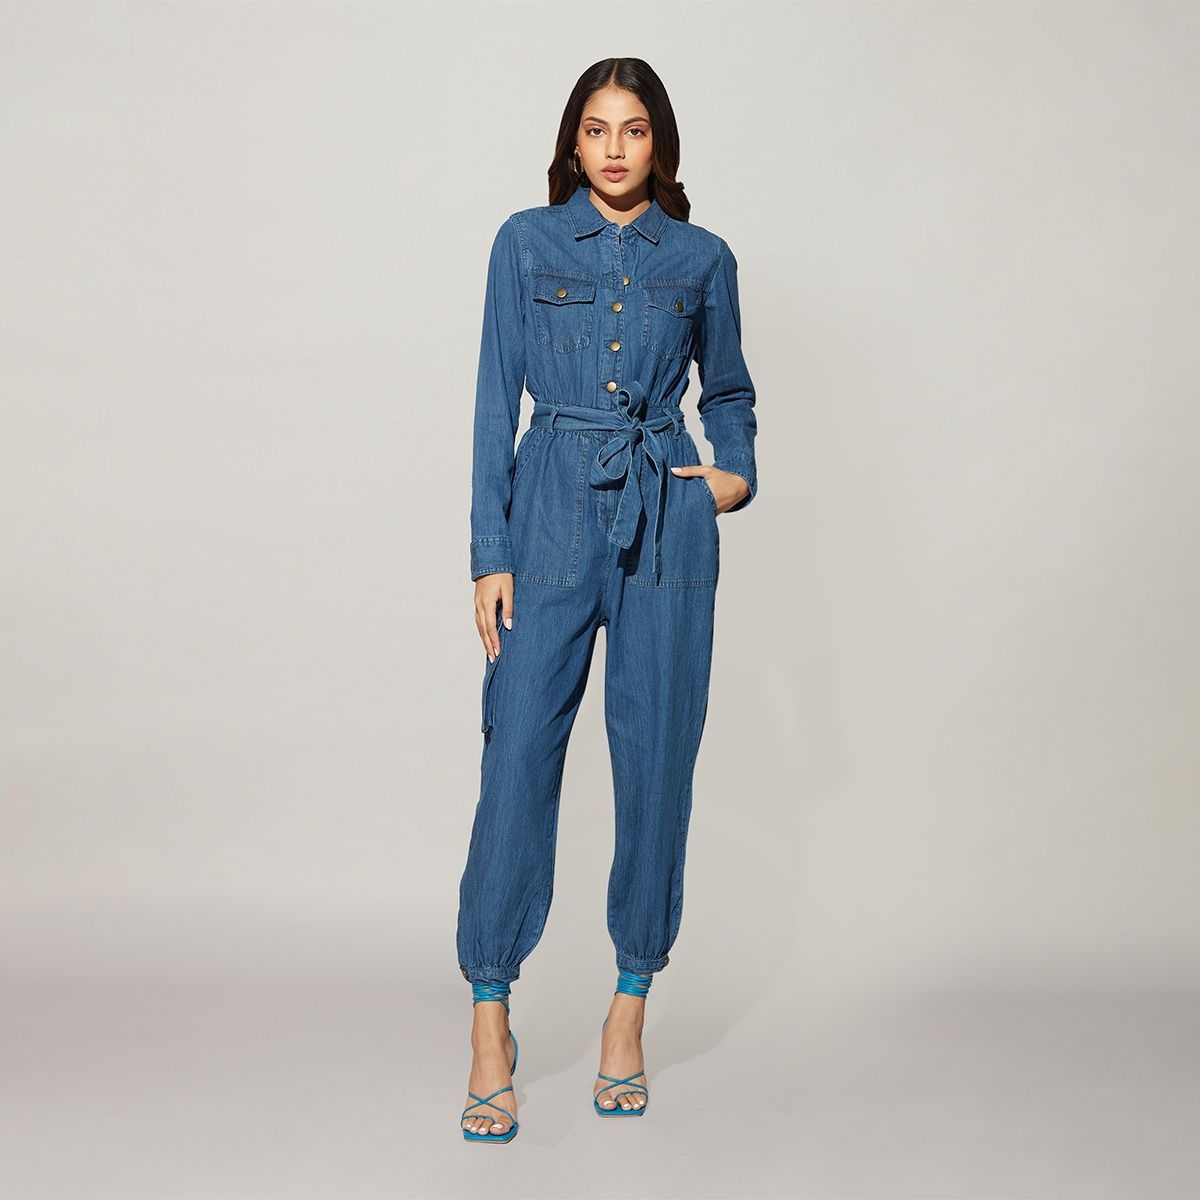 Buy EVERBELLE Casual Denim Jumpsuit 6 | Jumpsuits and playsuits | Tu